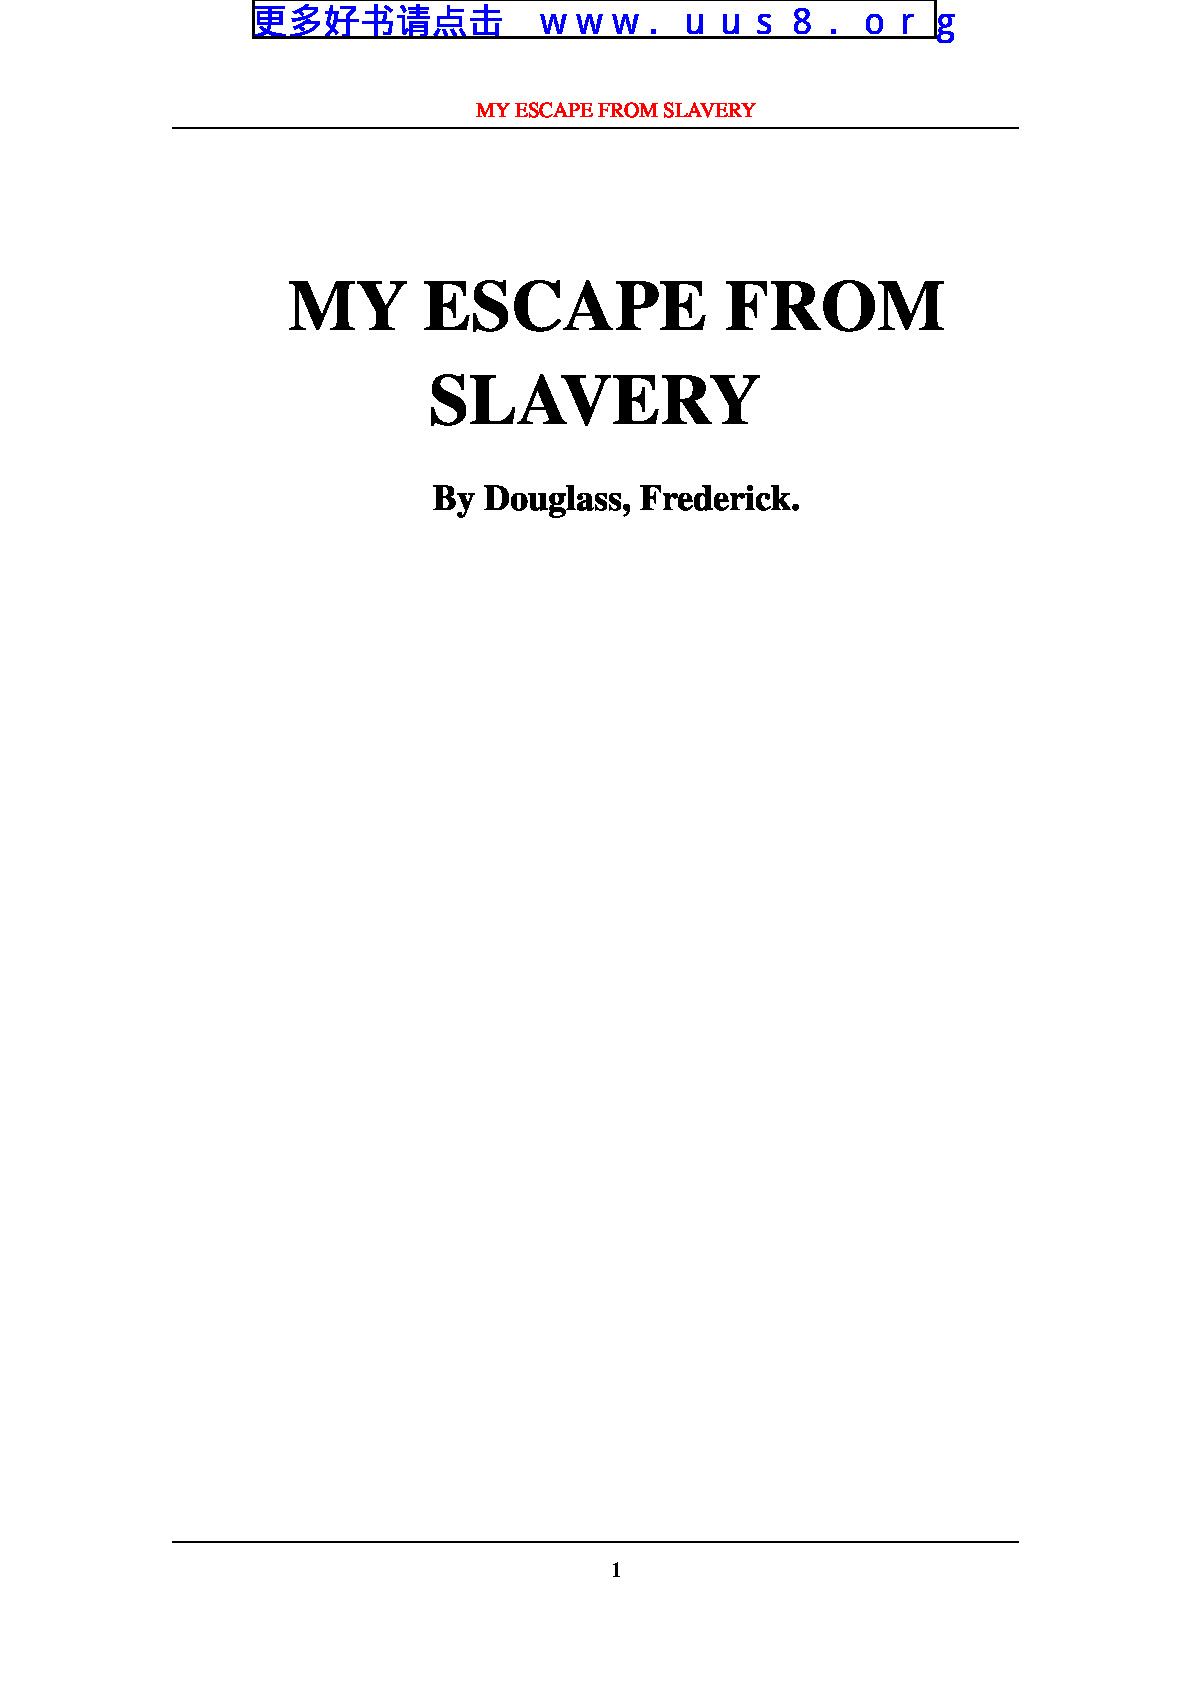 MY_ESCAPE_FROM_SLAVERY(摆脱奴役)